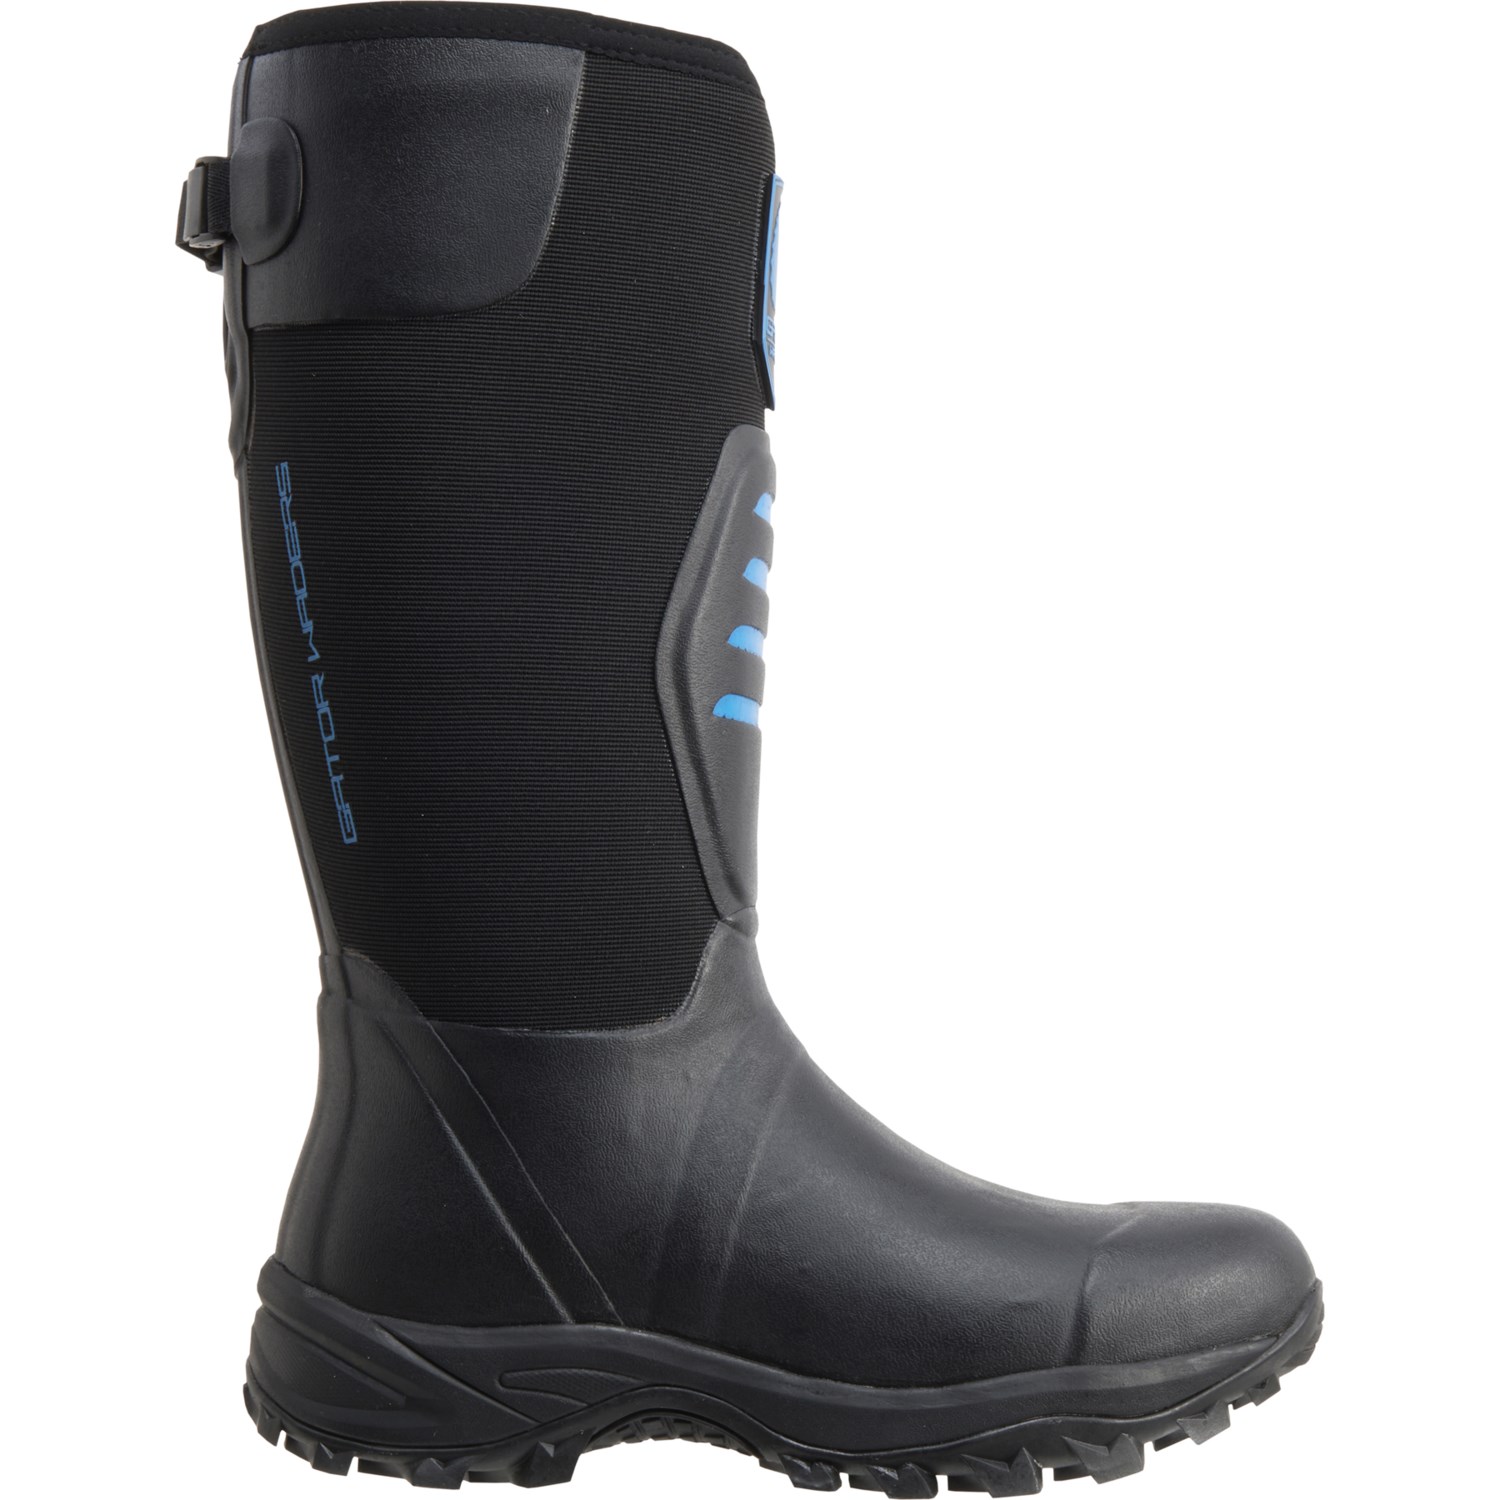 Gator Waders Everglade 2.0 Boots (For Men) - Save 51%